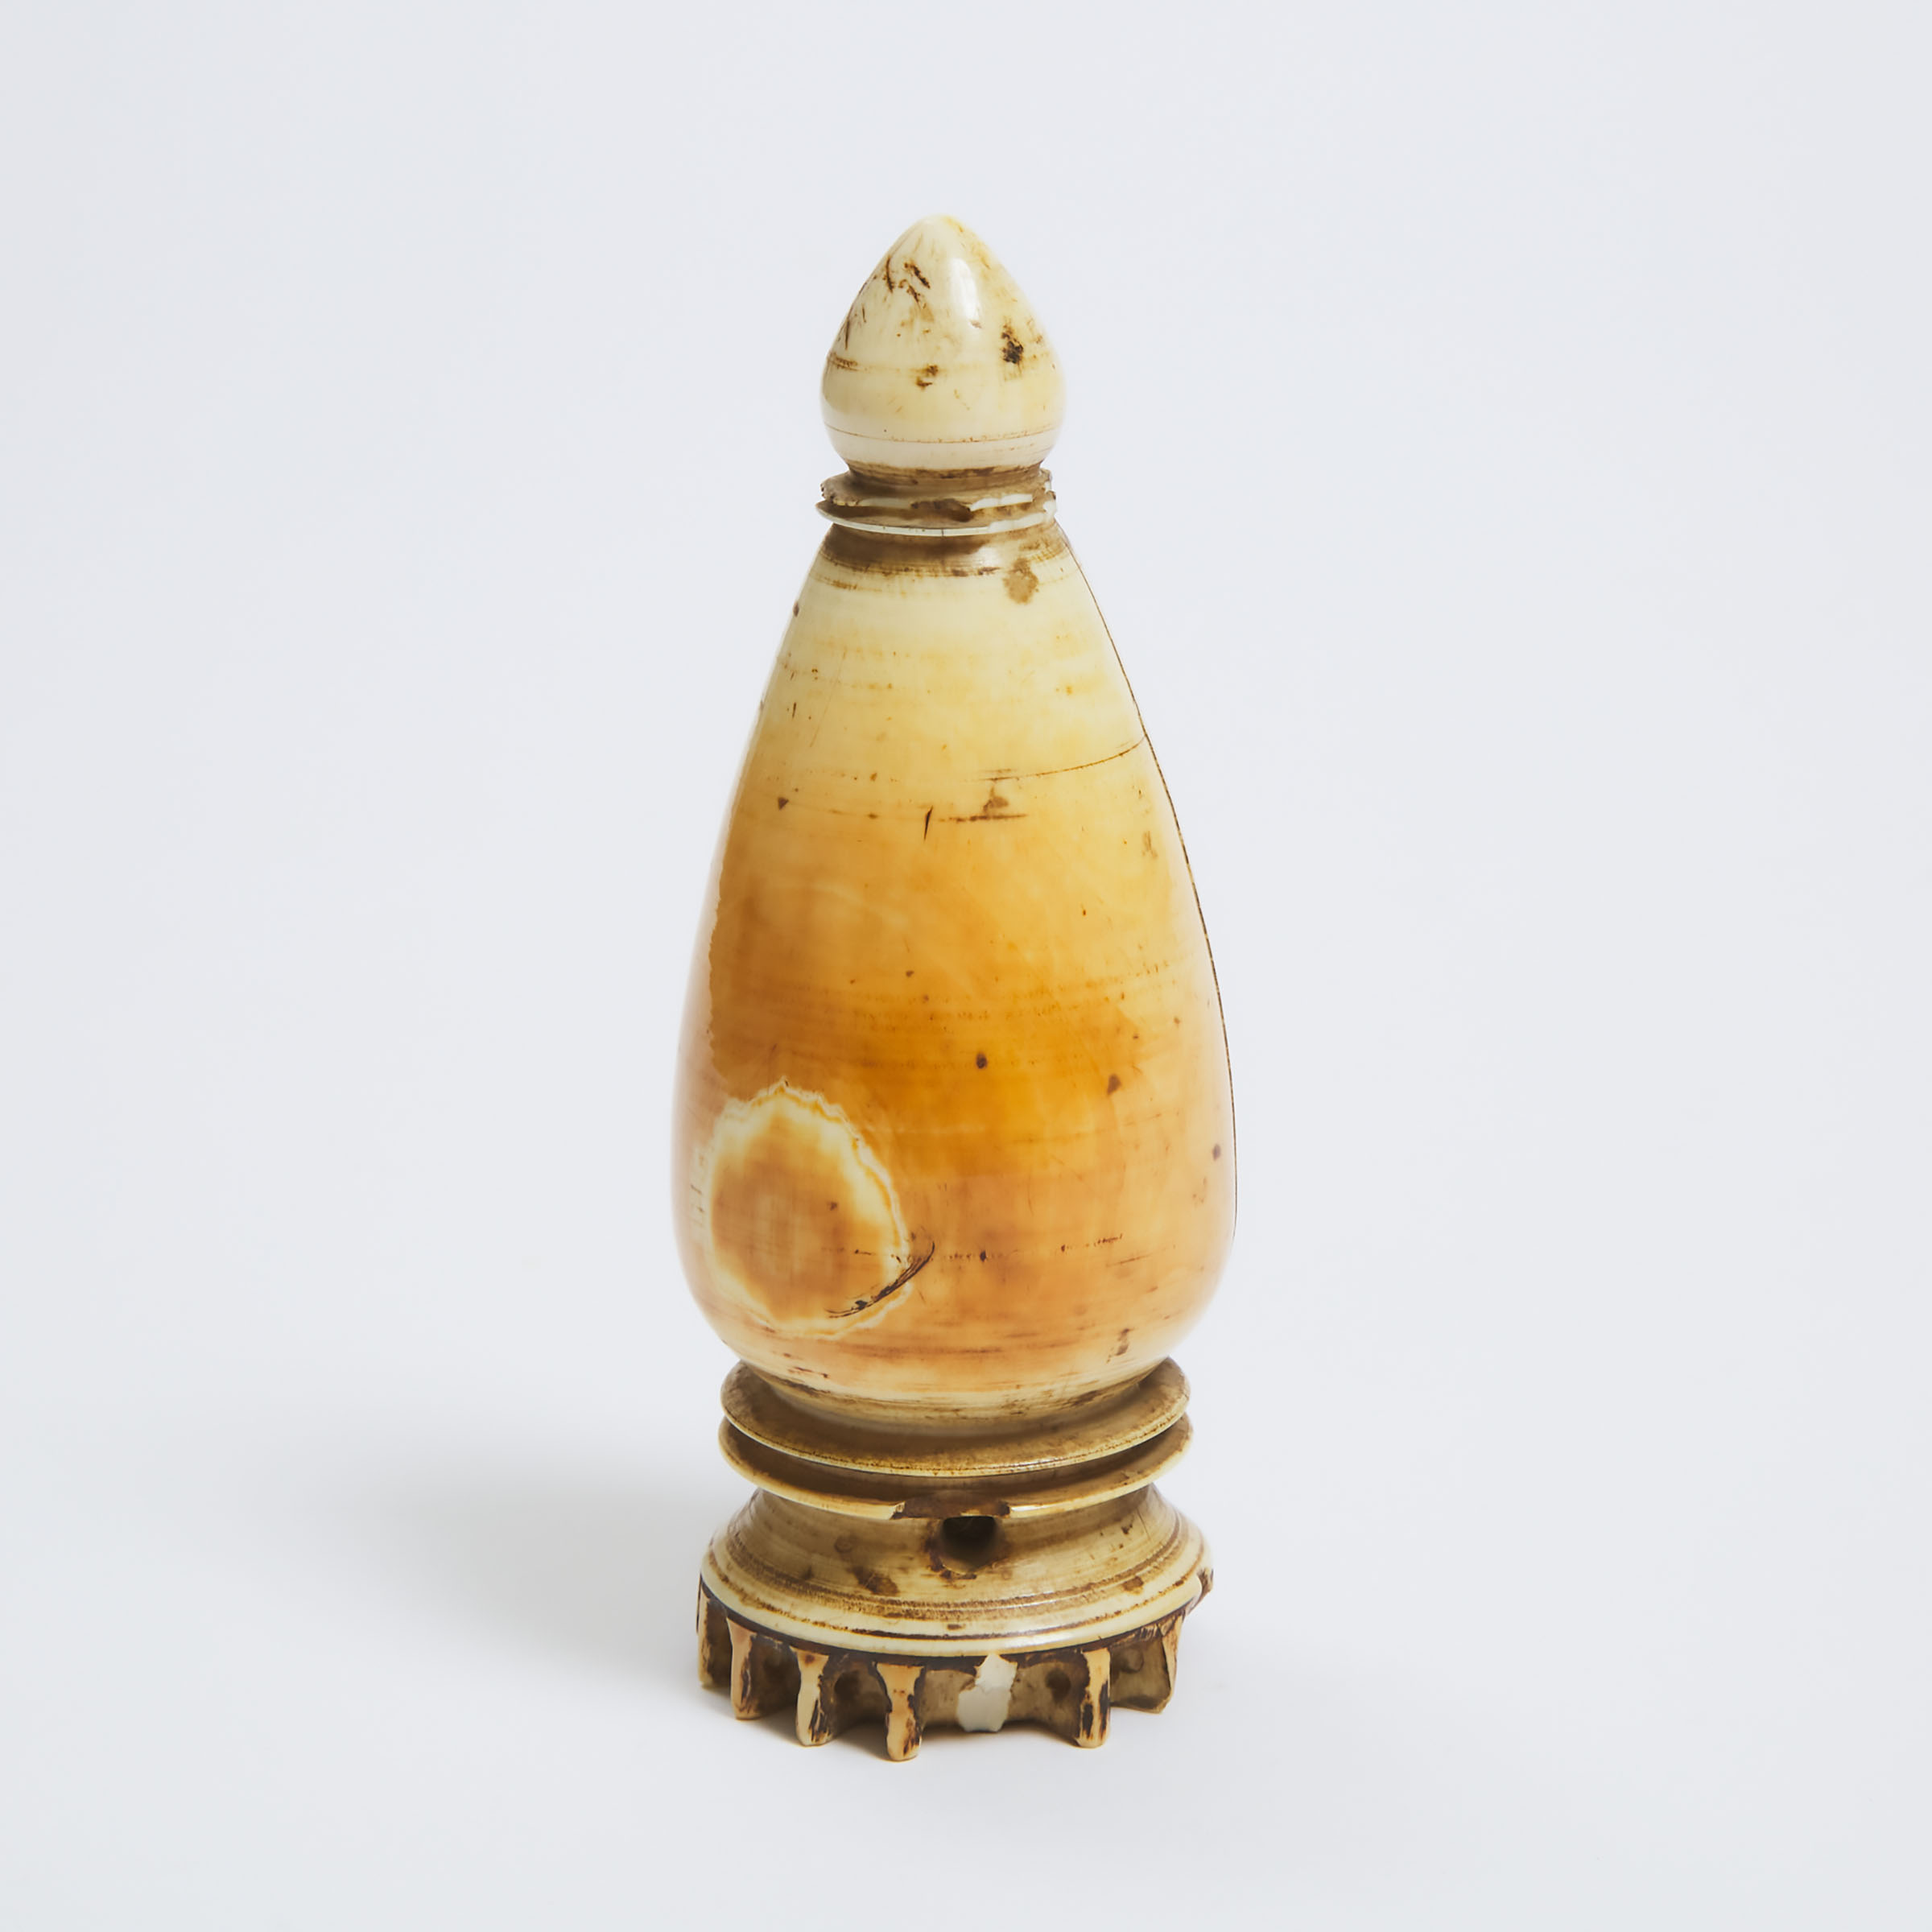 A Tibetan Ivory Stupa With Consecration, 18th Century or Earlier